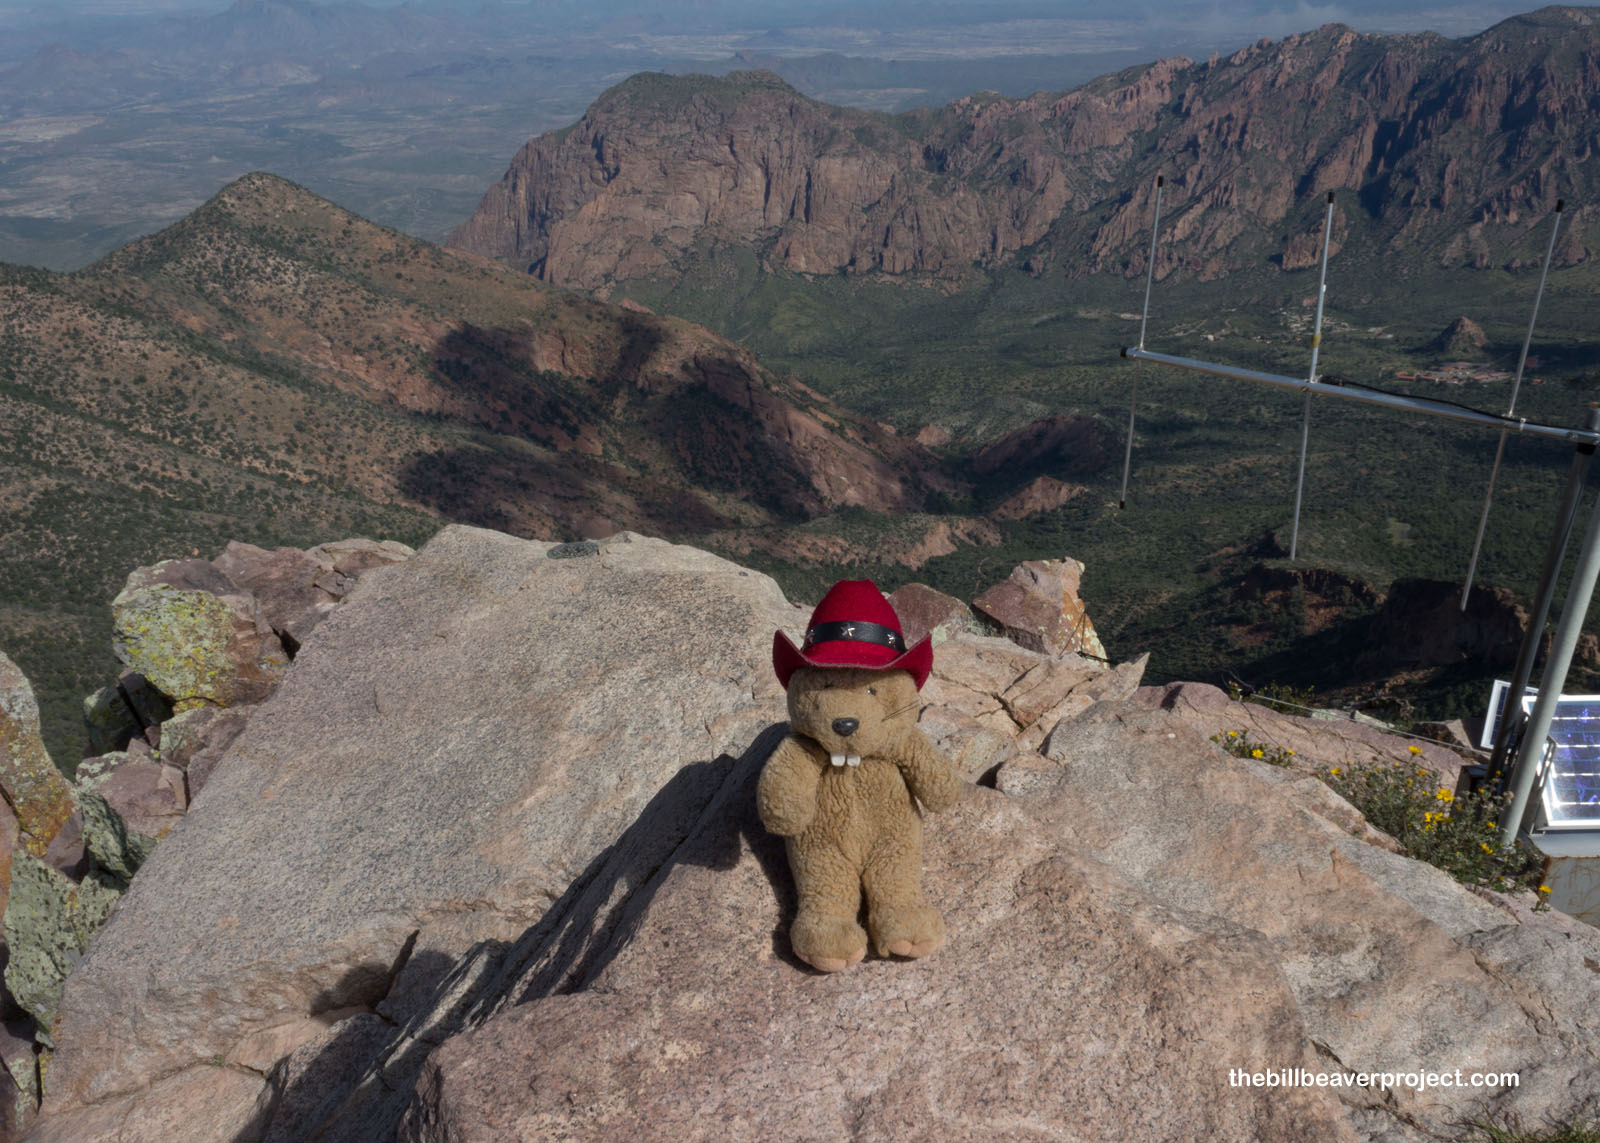 A view from the summit of Emory Peak!